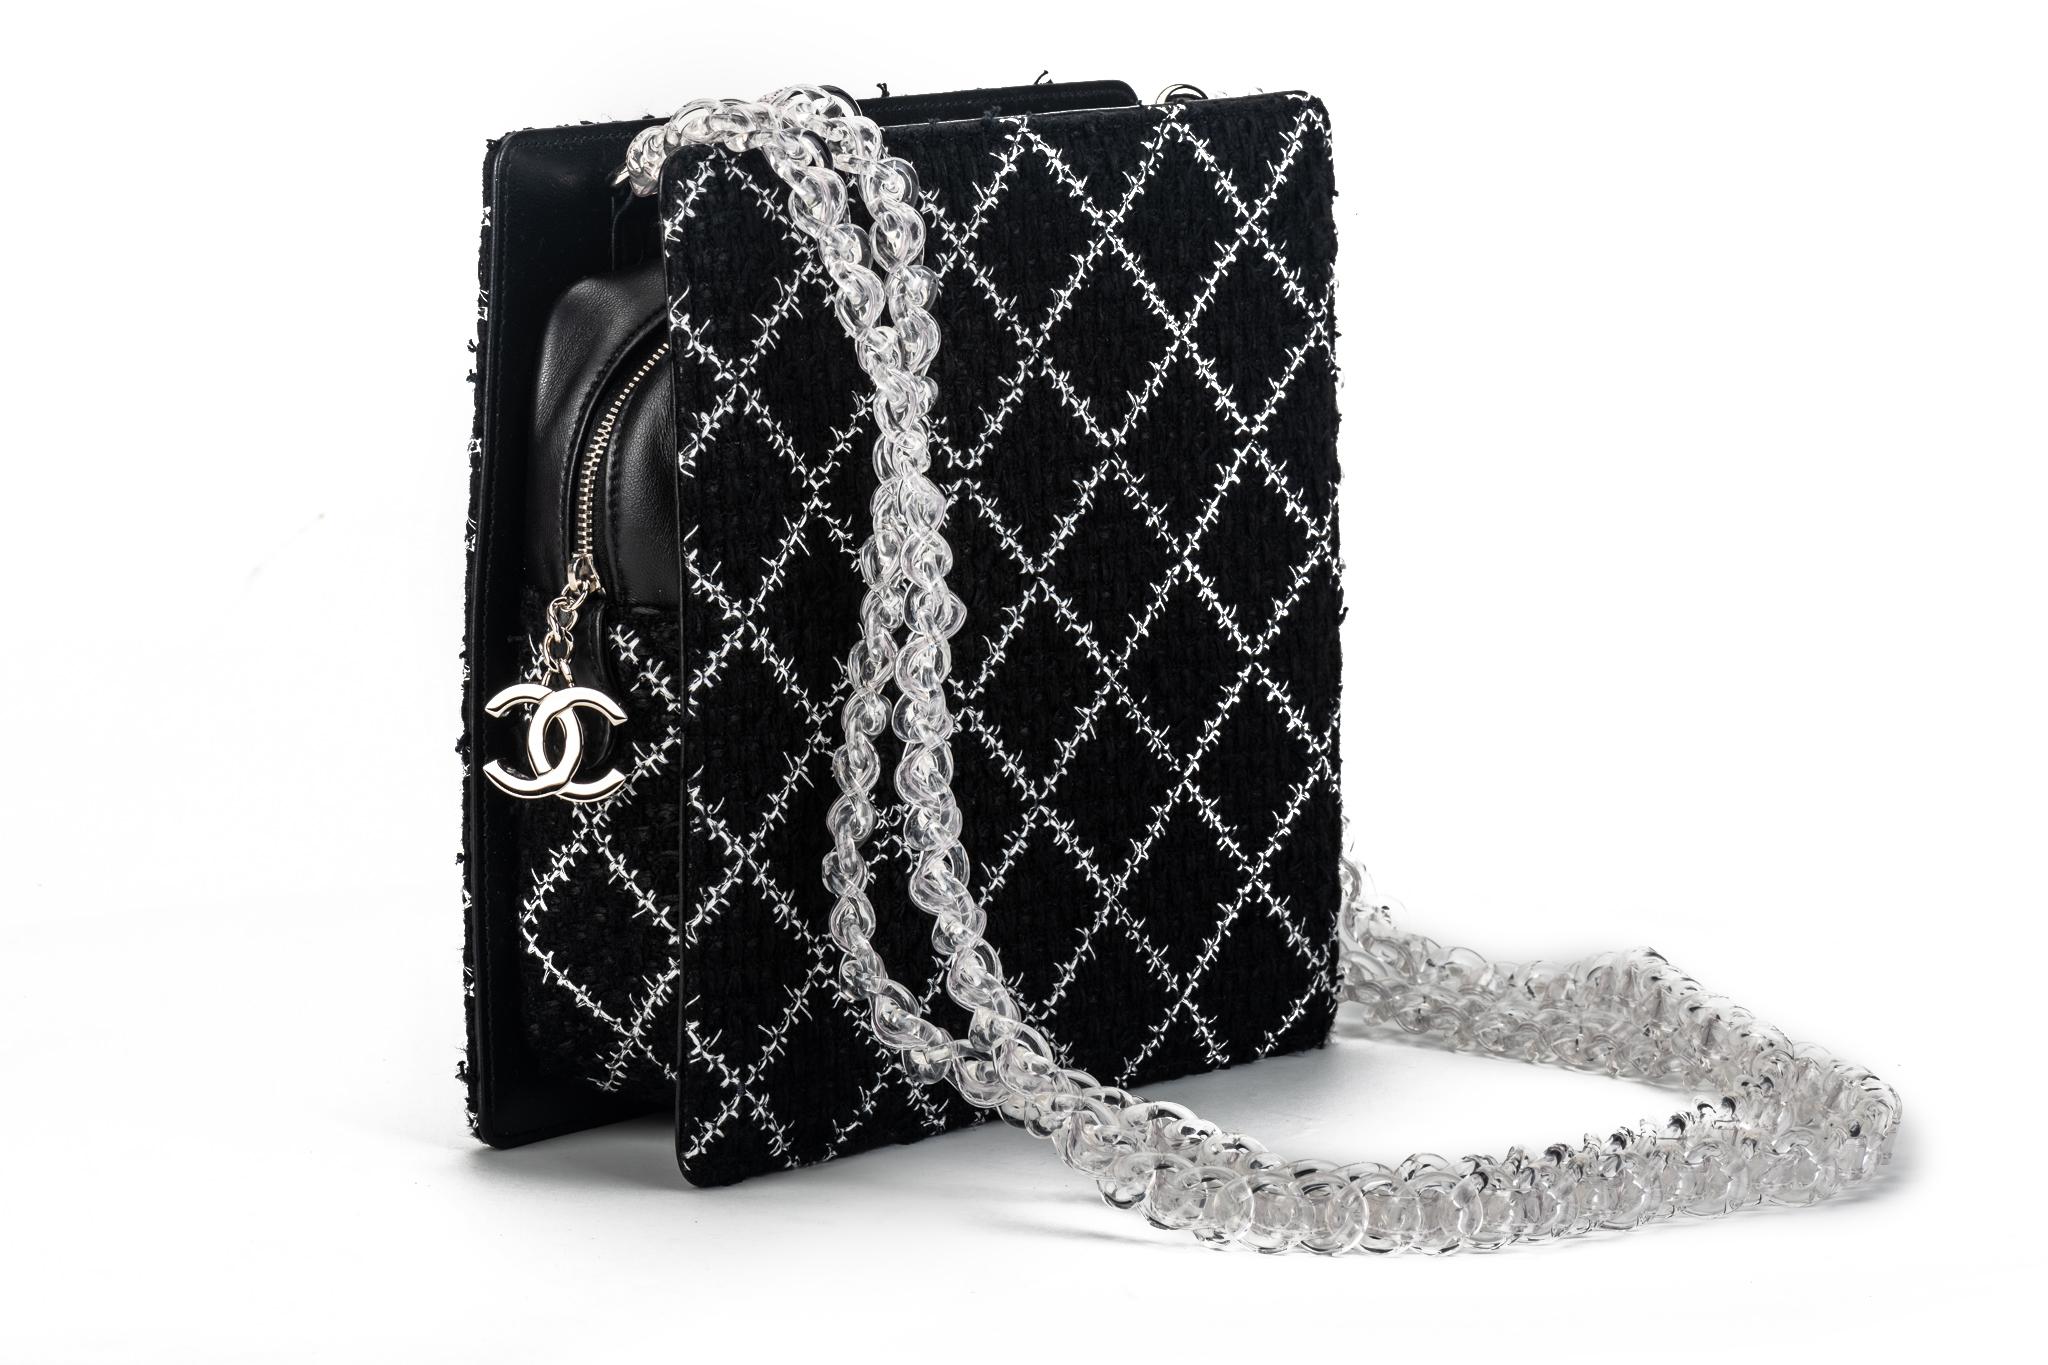 New Chanel Black Tweed Clear Lucite Bag In New Condition For Sale In West Hollywood, CA